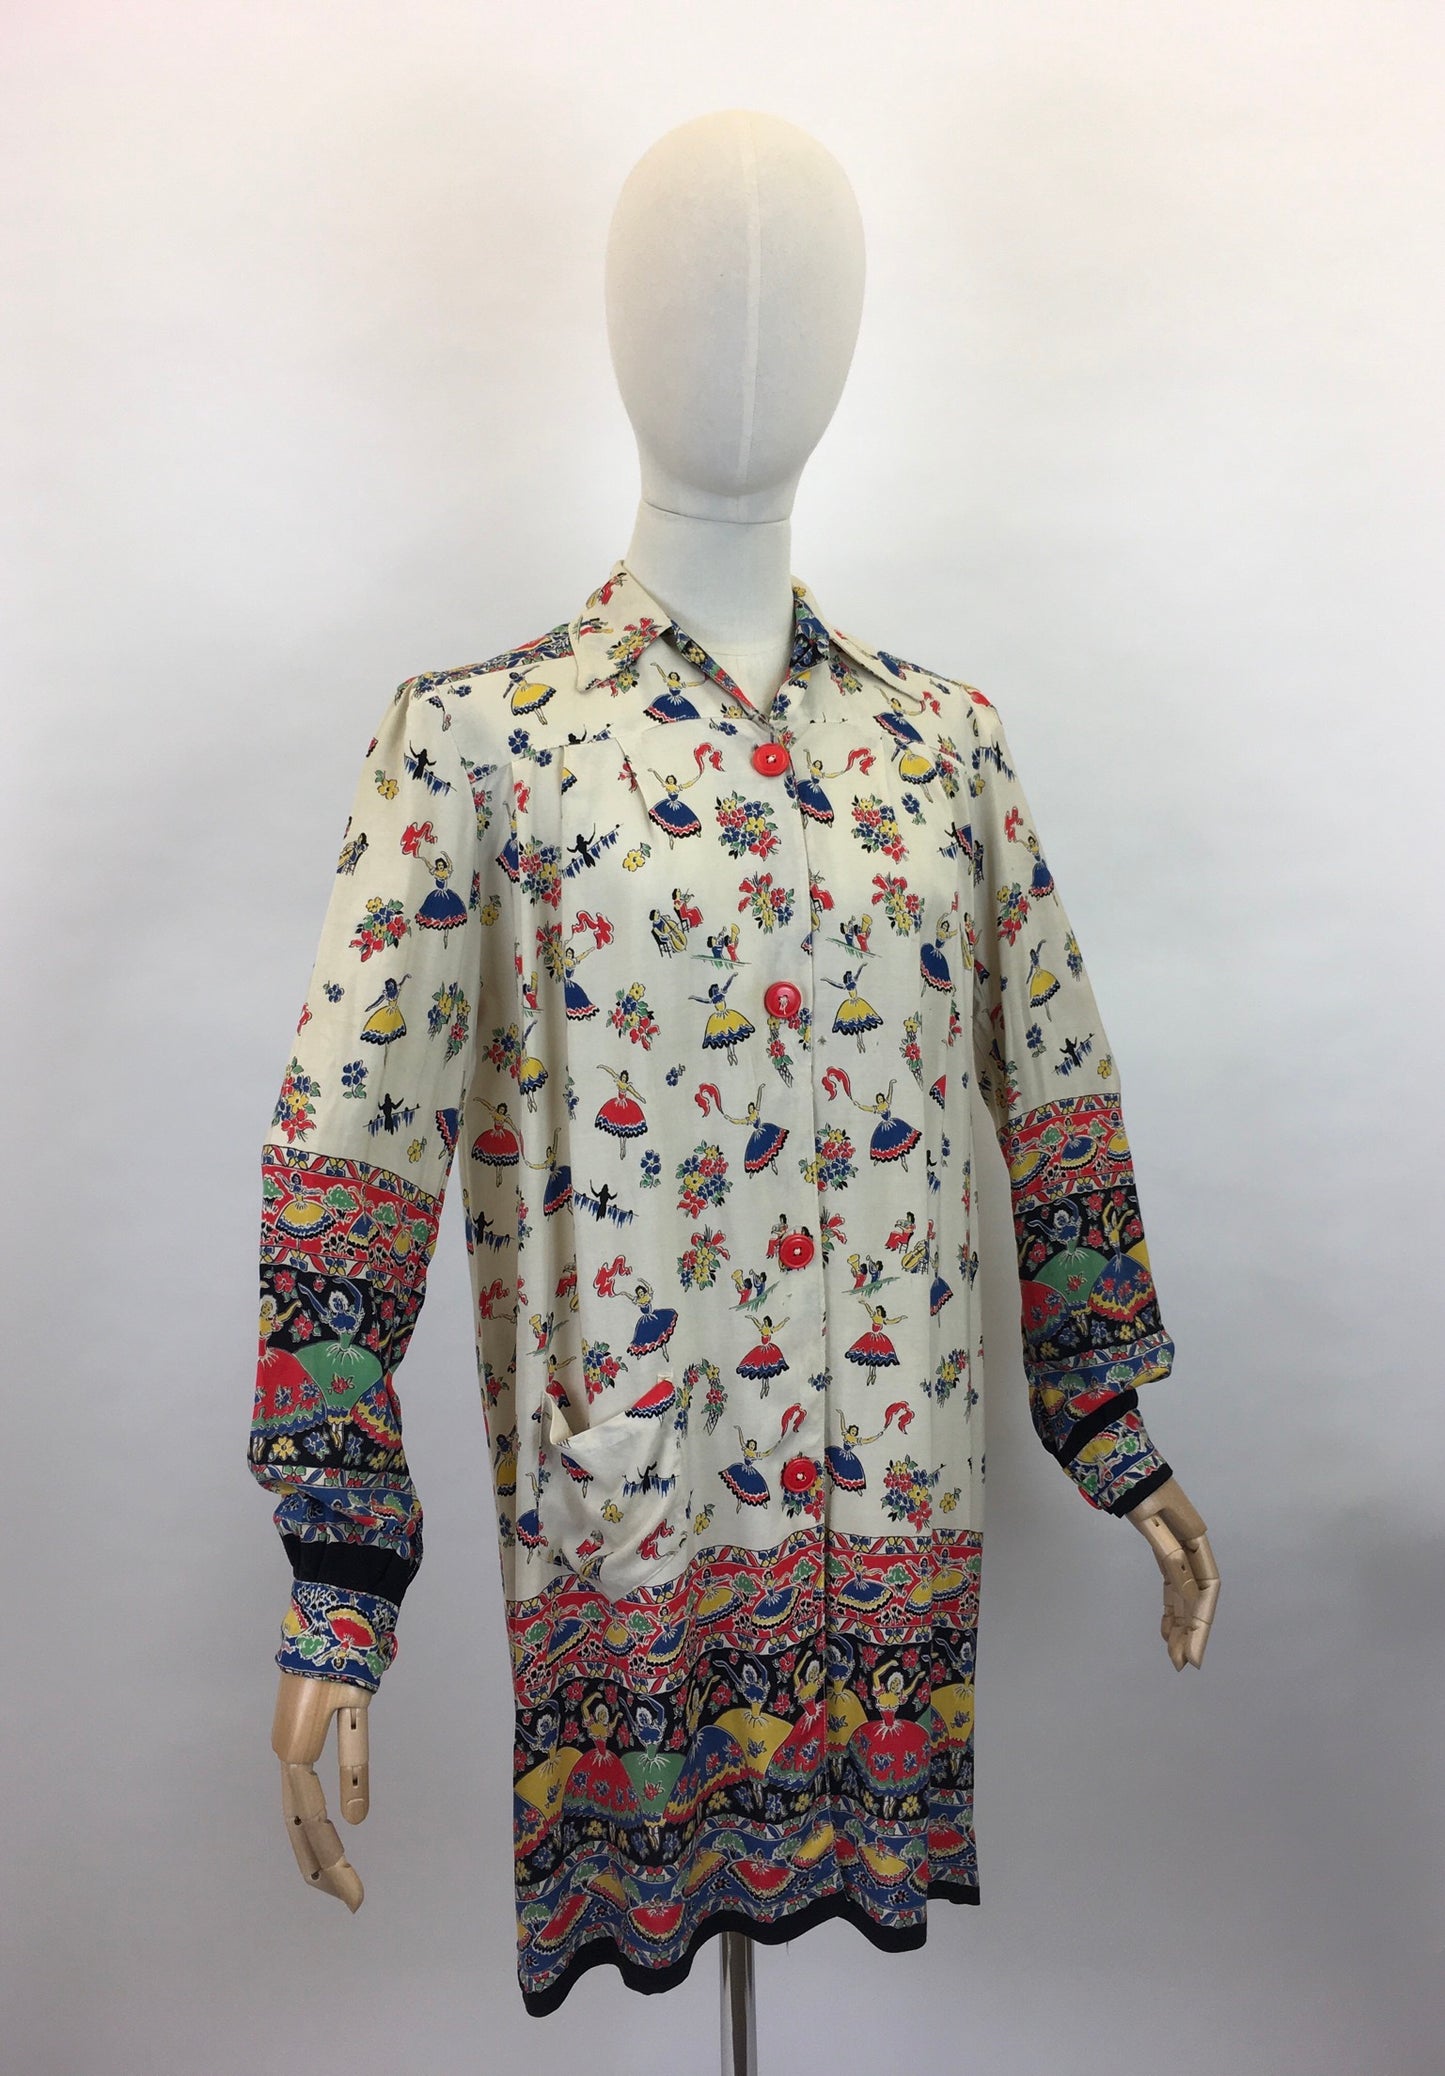 Original 1940s CC41 St. Michael Novelty Print Smock - In Fabulous Dancer Print in Bright Primary Colours